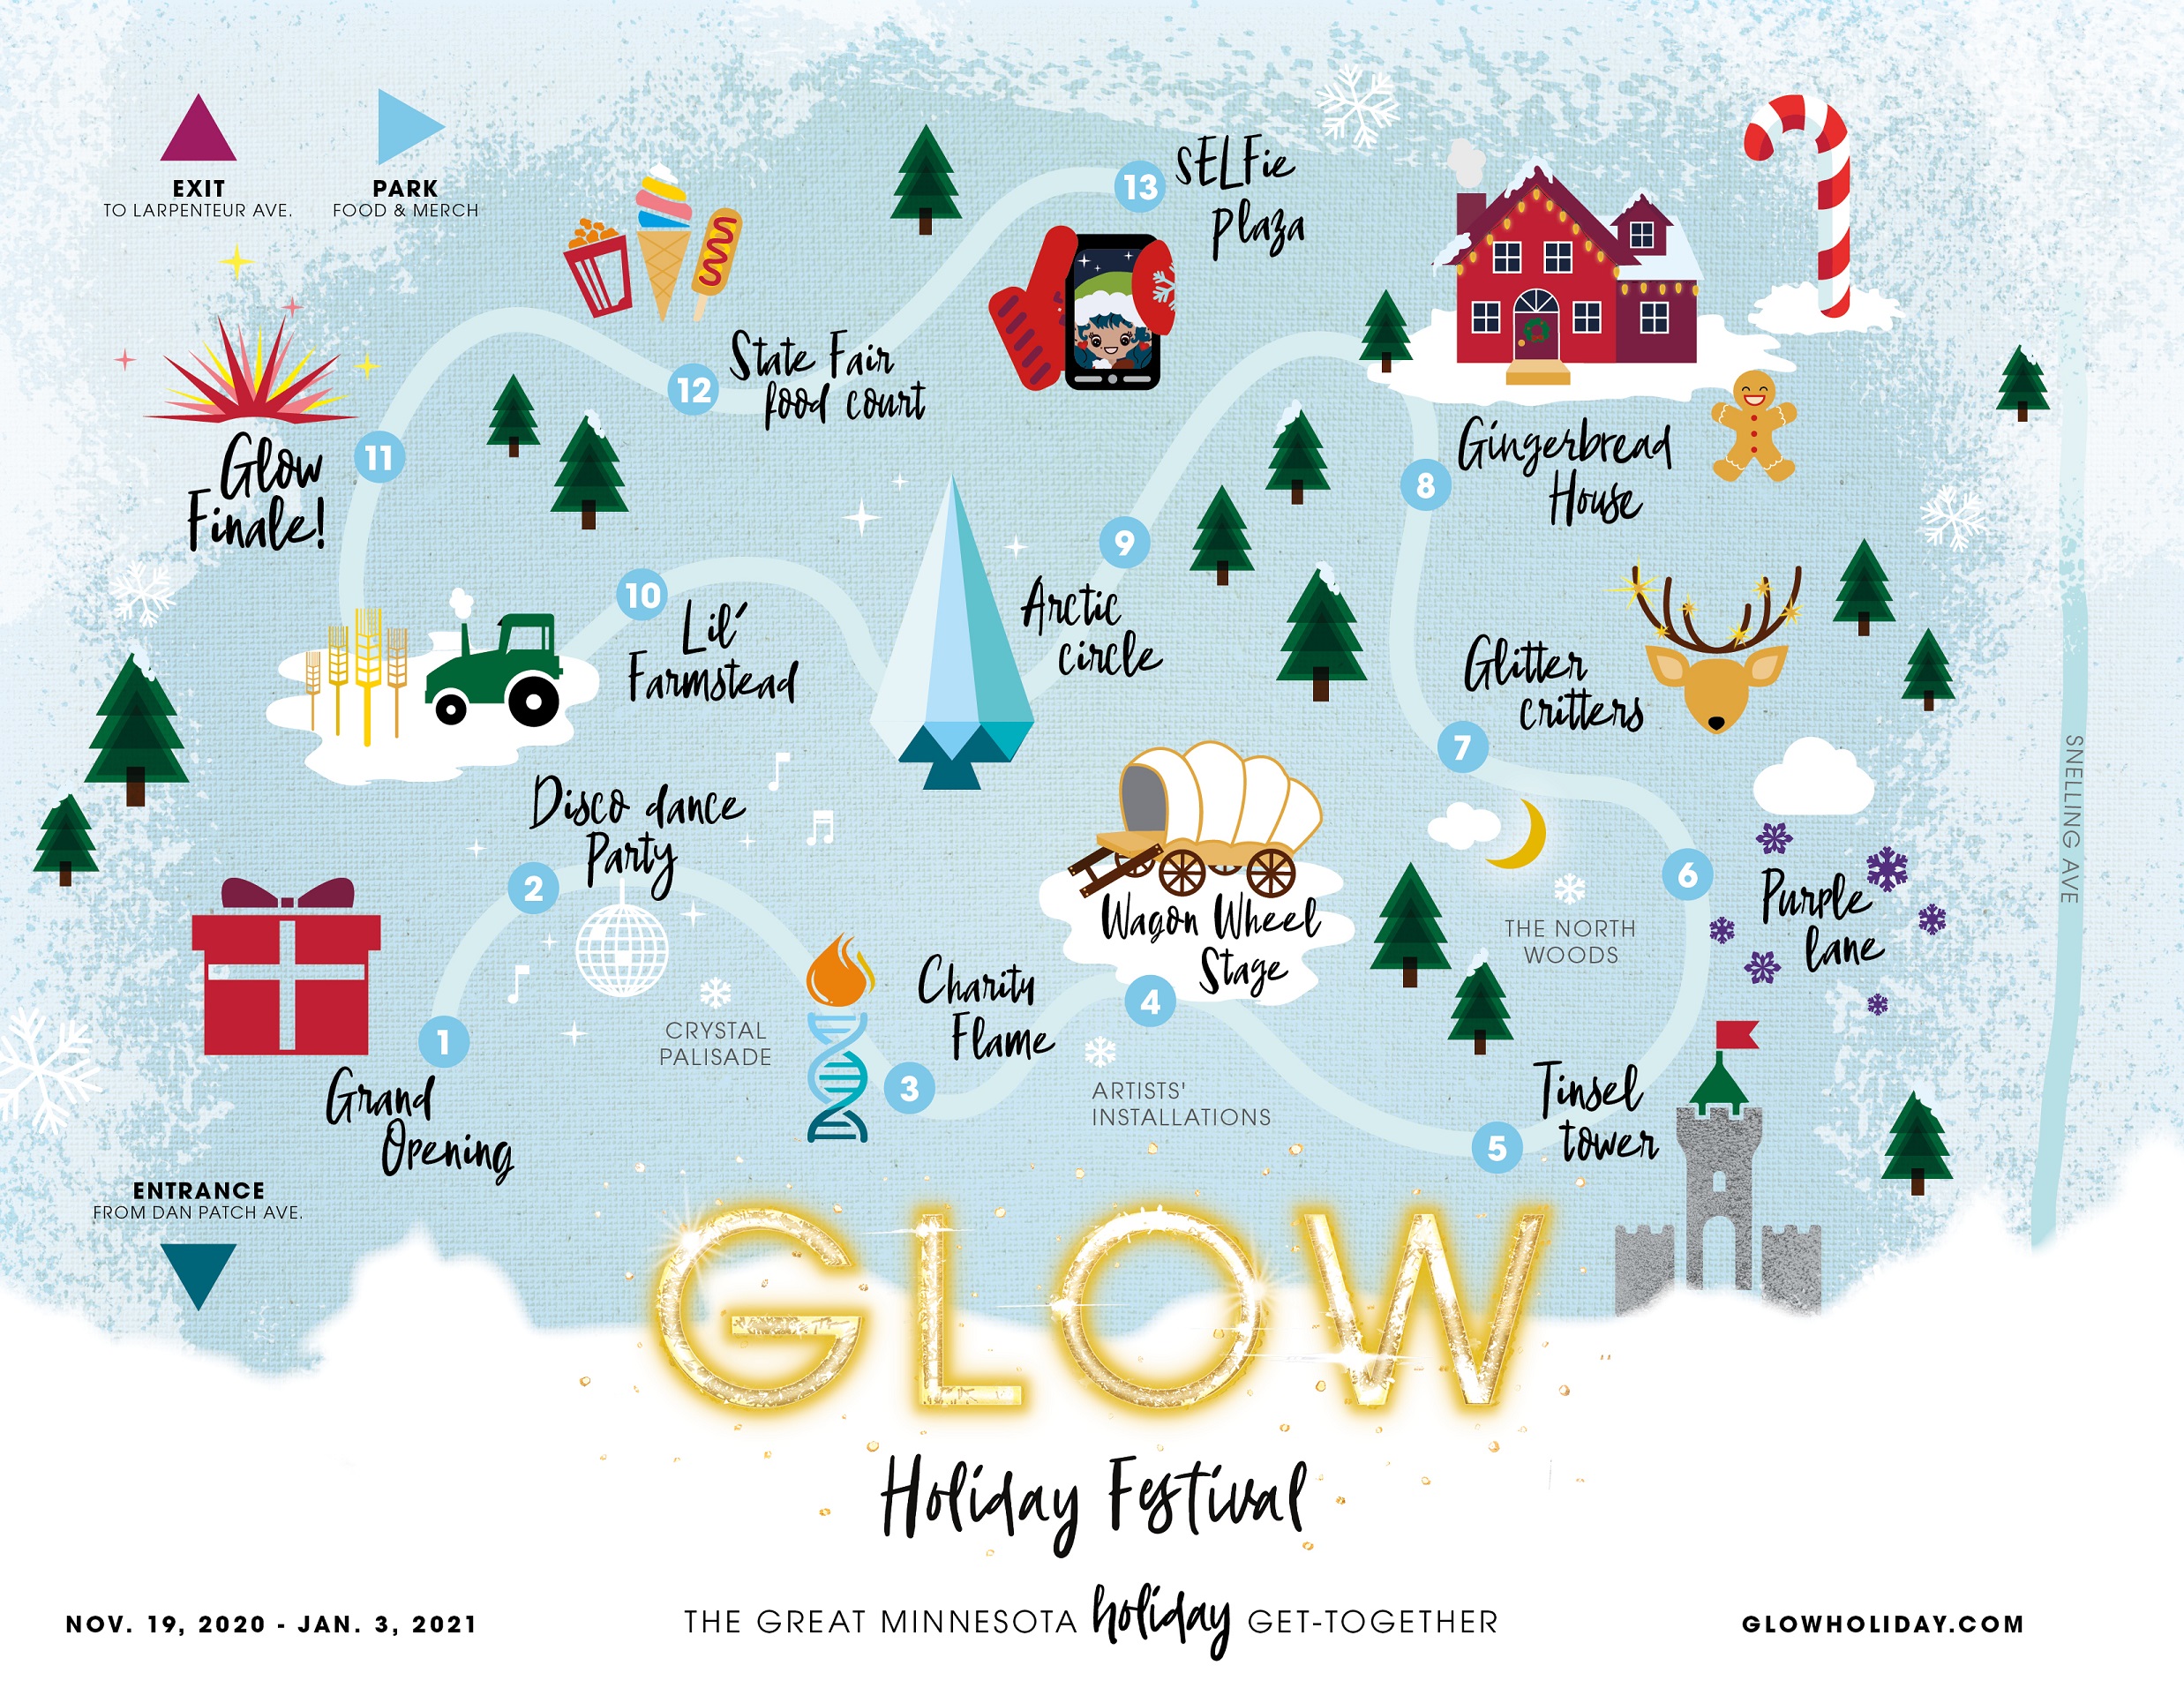 Glow' Holiday Festival To Light Up The State Fairgrounds – WCCO | CBS  Minnesota